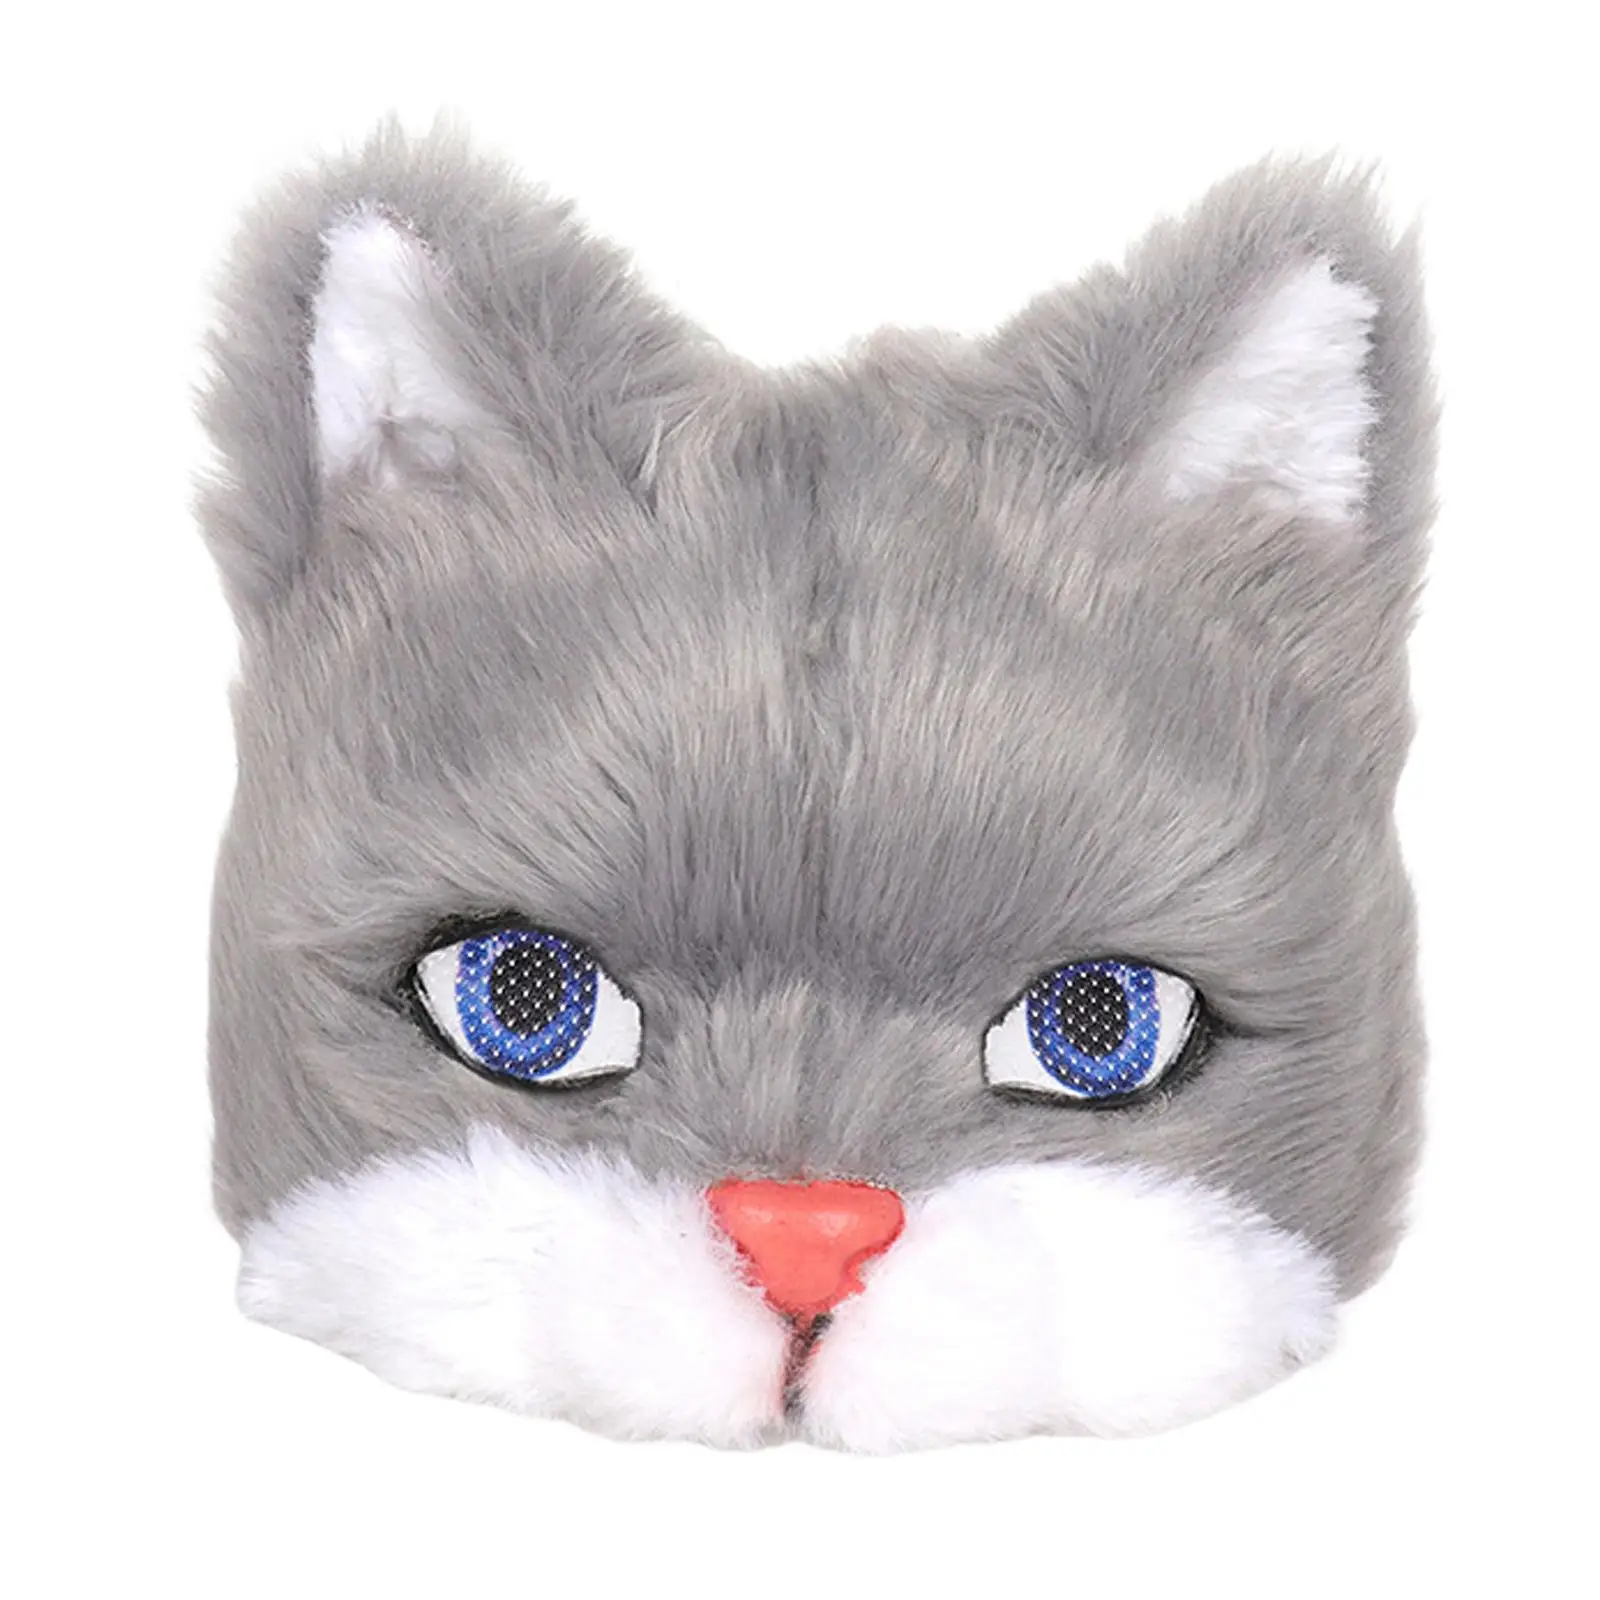 Novelty Plush Cat Mask Female Half Face for Kids Adults Eye Mask for Masquerade Role Play Photo Prop Cosplay Accessories Costume